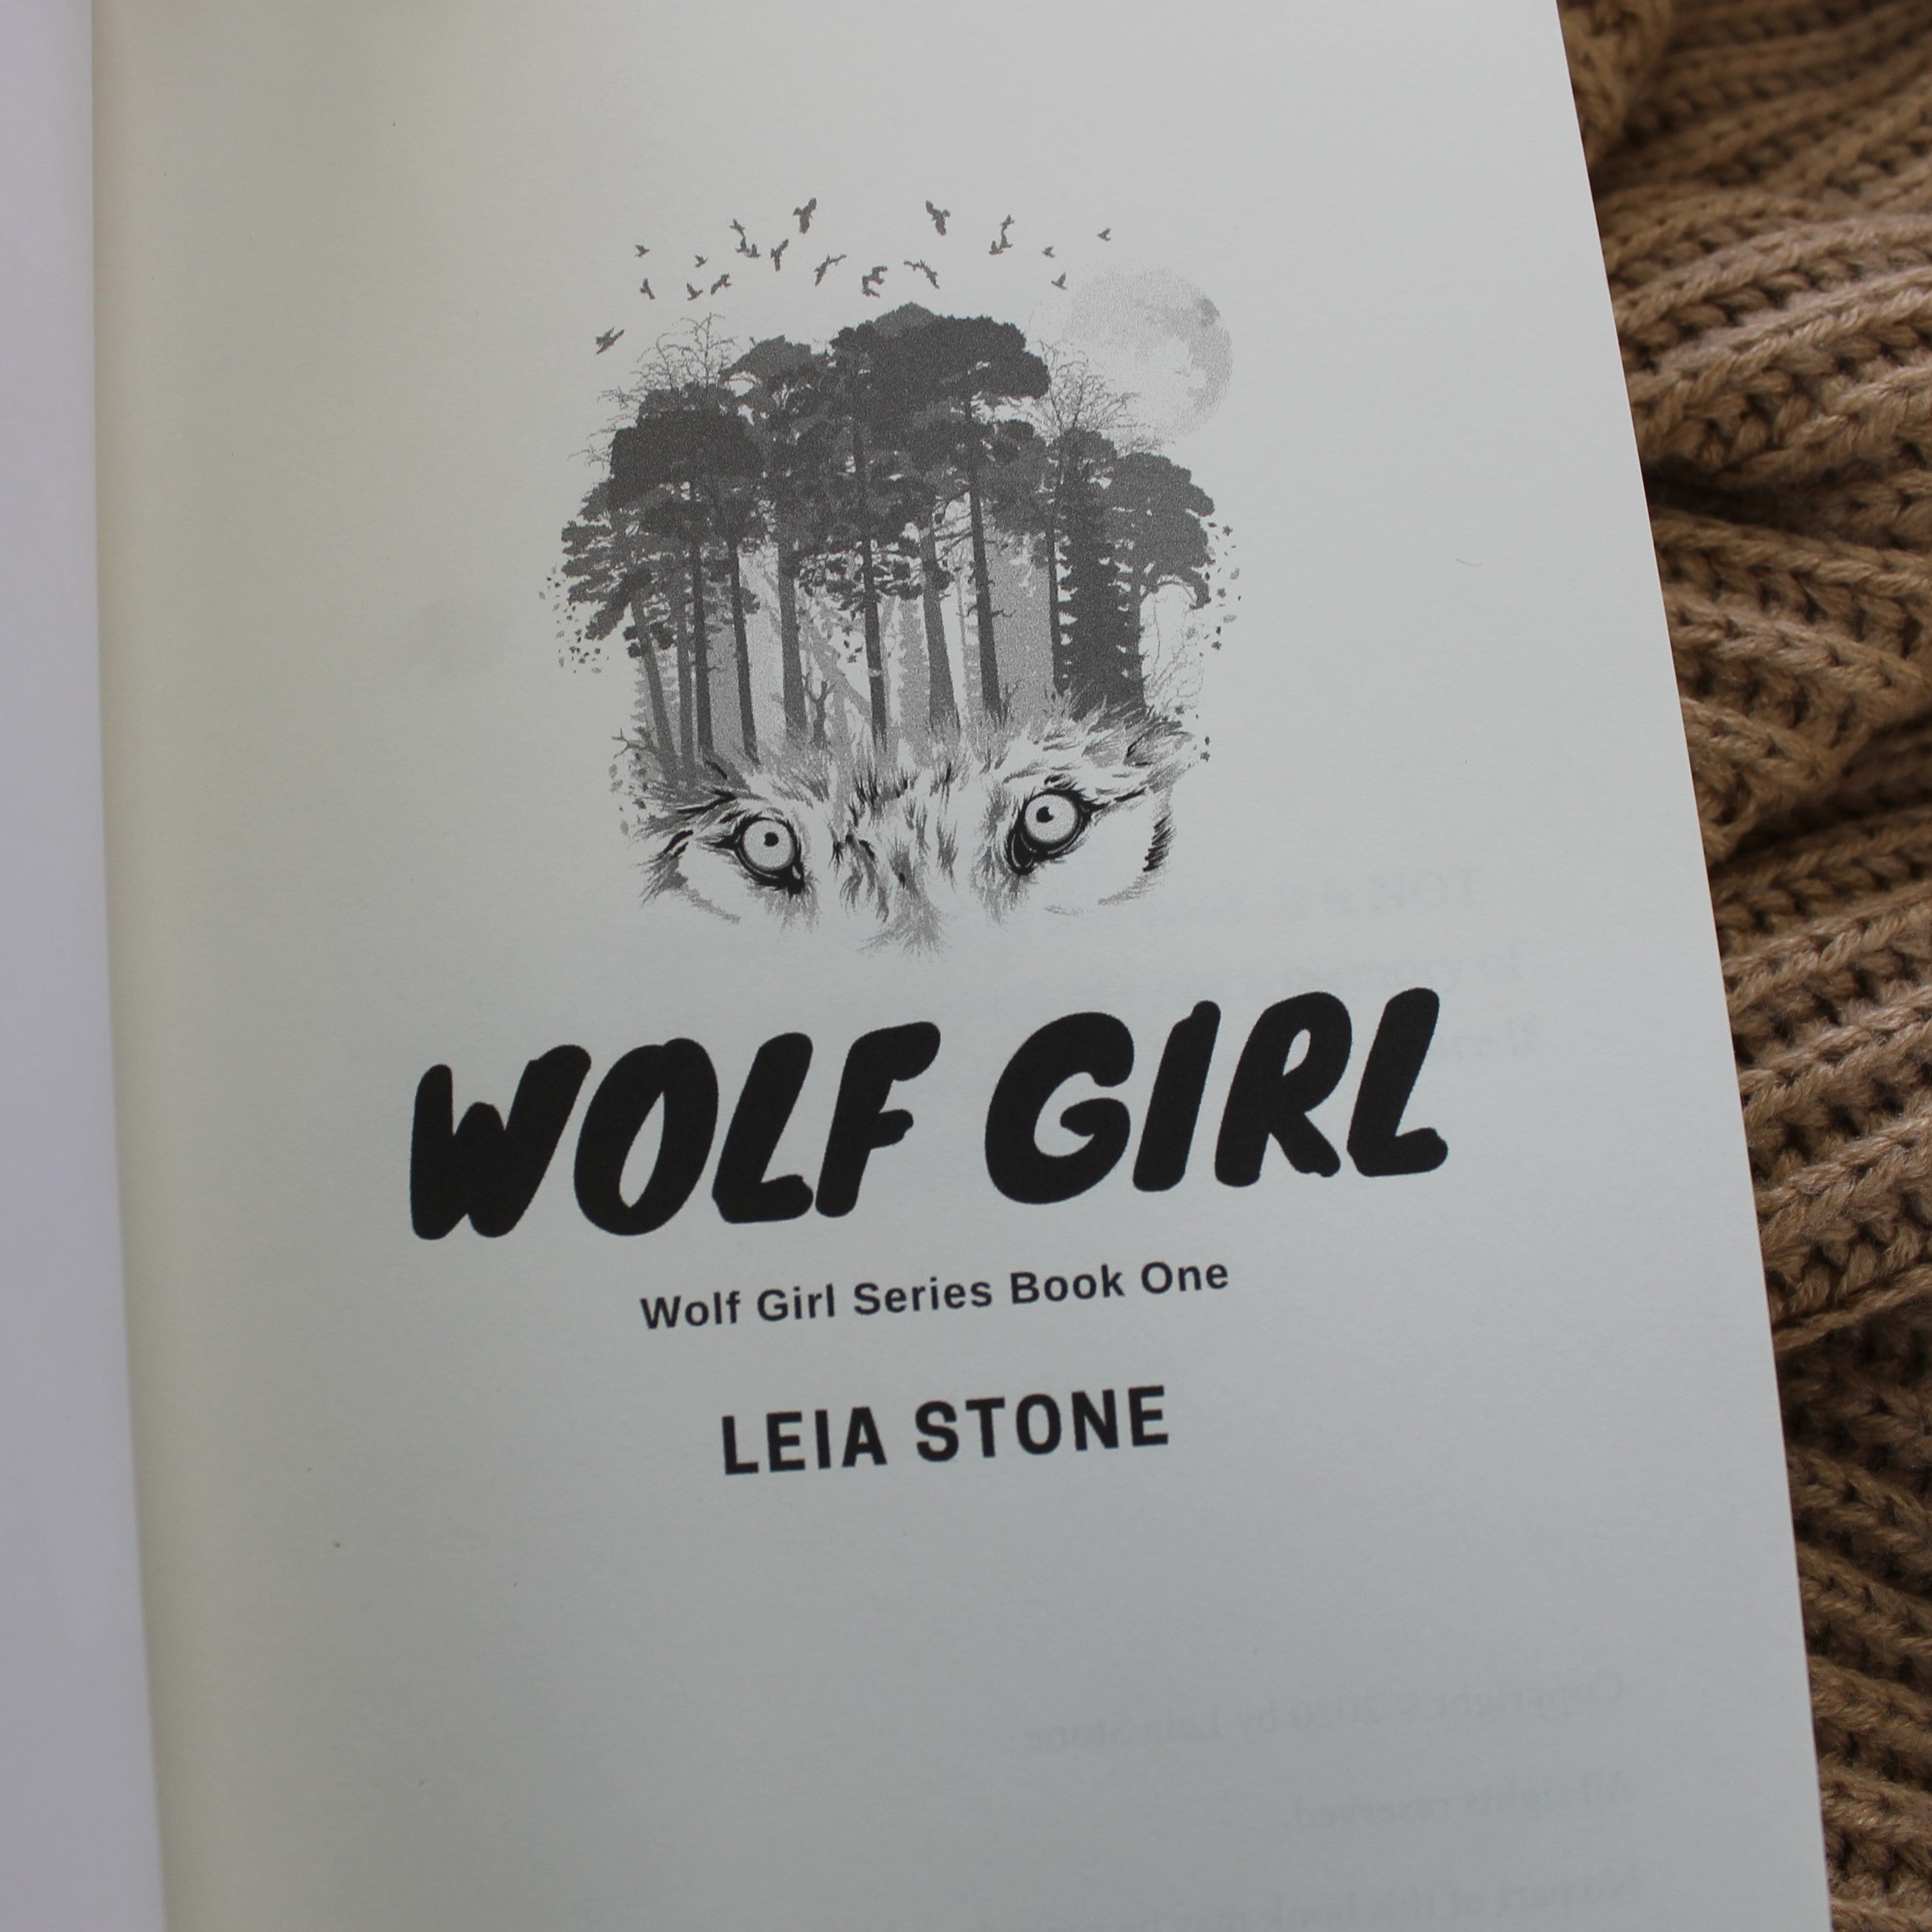 Wolf Girl series by Leia Stone